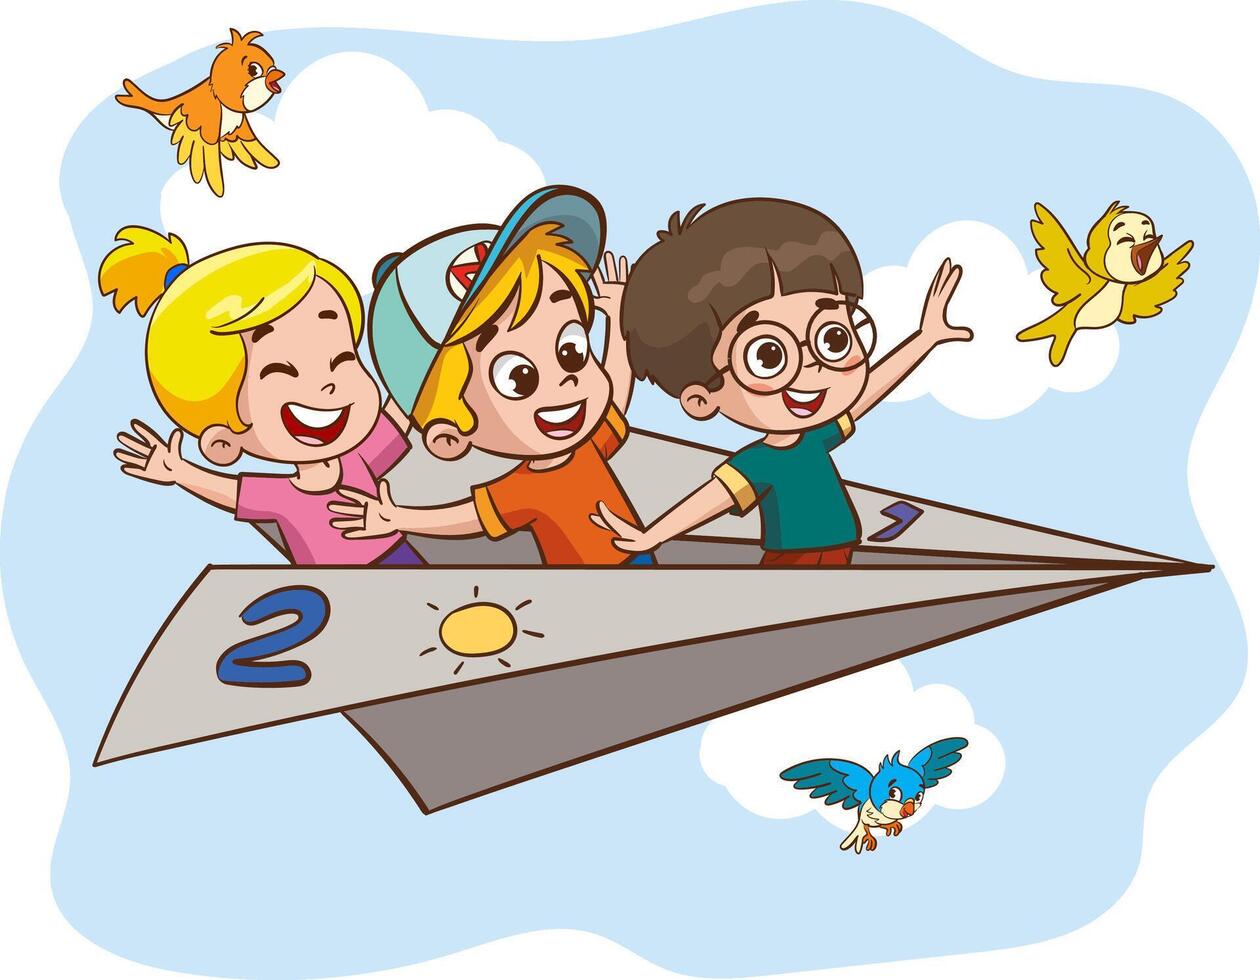 Cartoon Kids Flying With Paper Plane.kids ride paper plane vector illustration